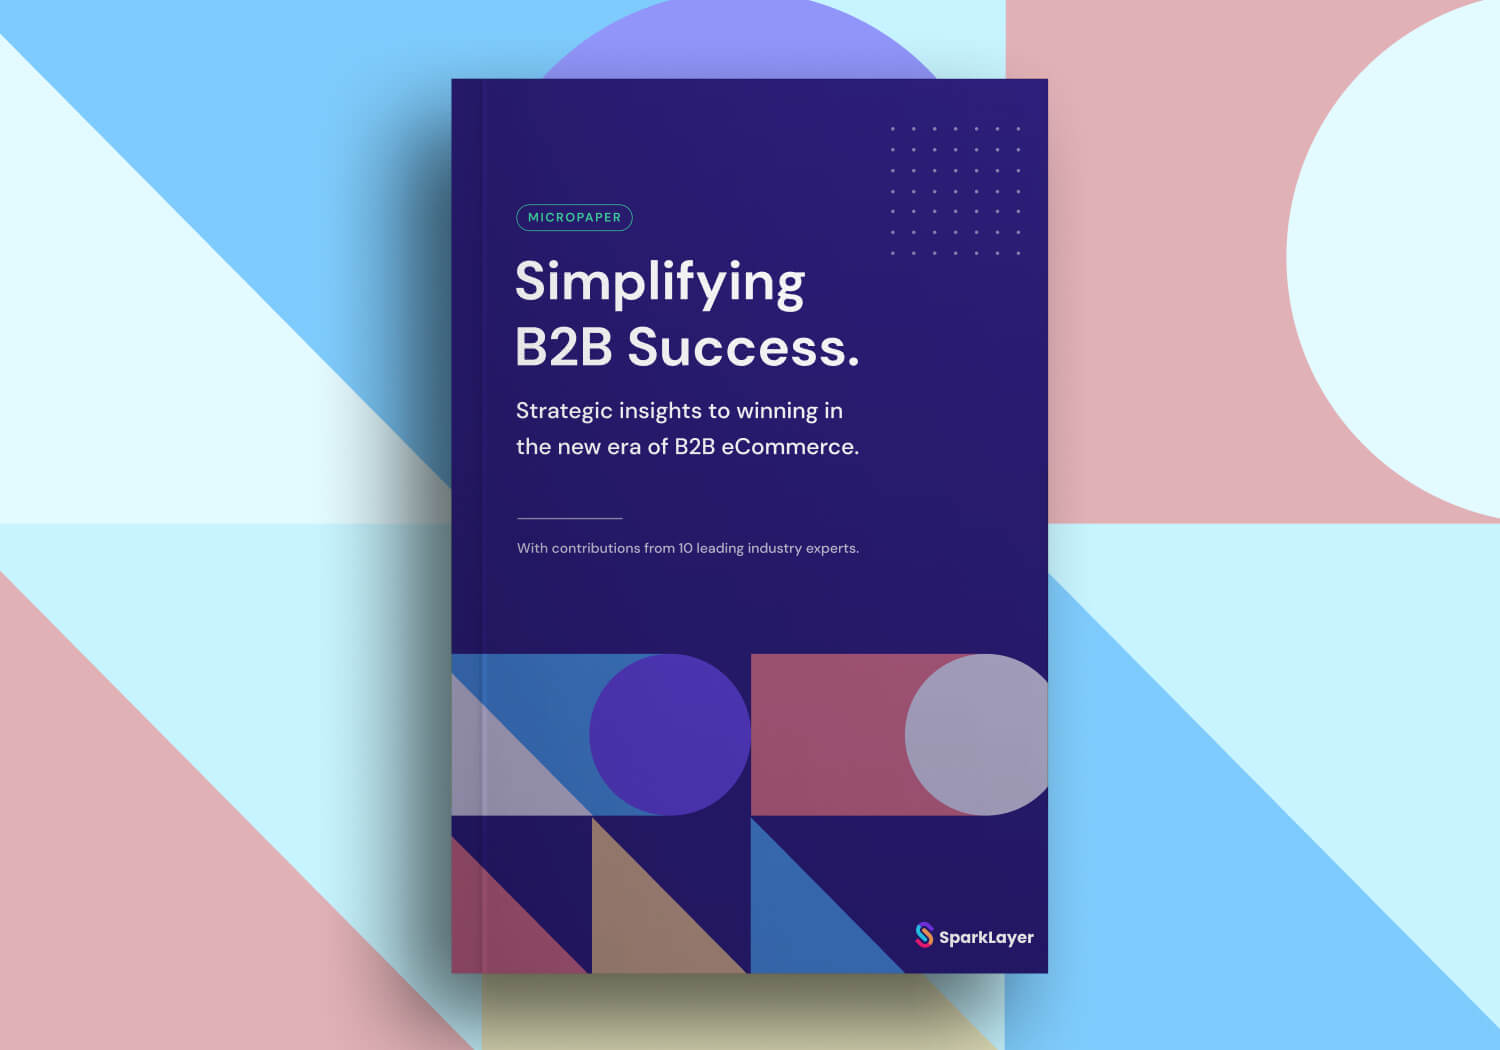 SparkLayer’s “Simplifying B2B Success” micropaper is now live!